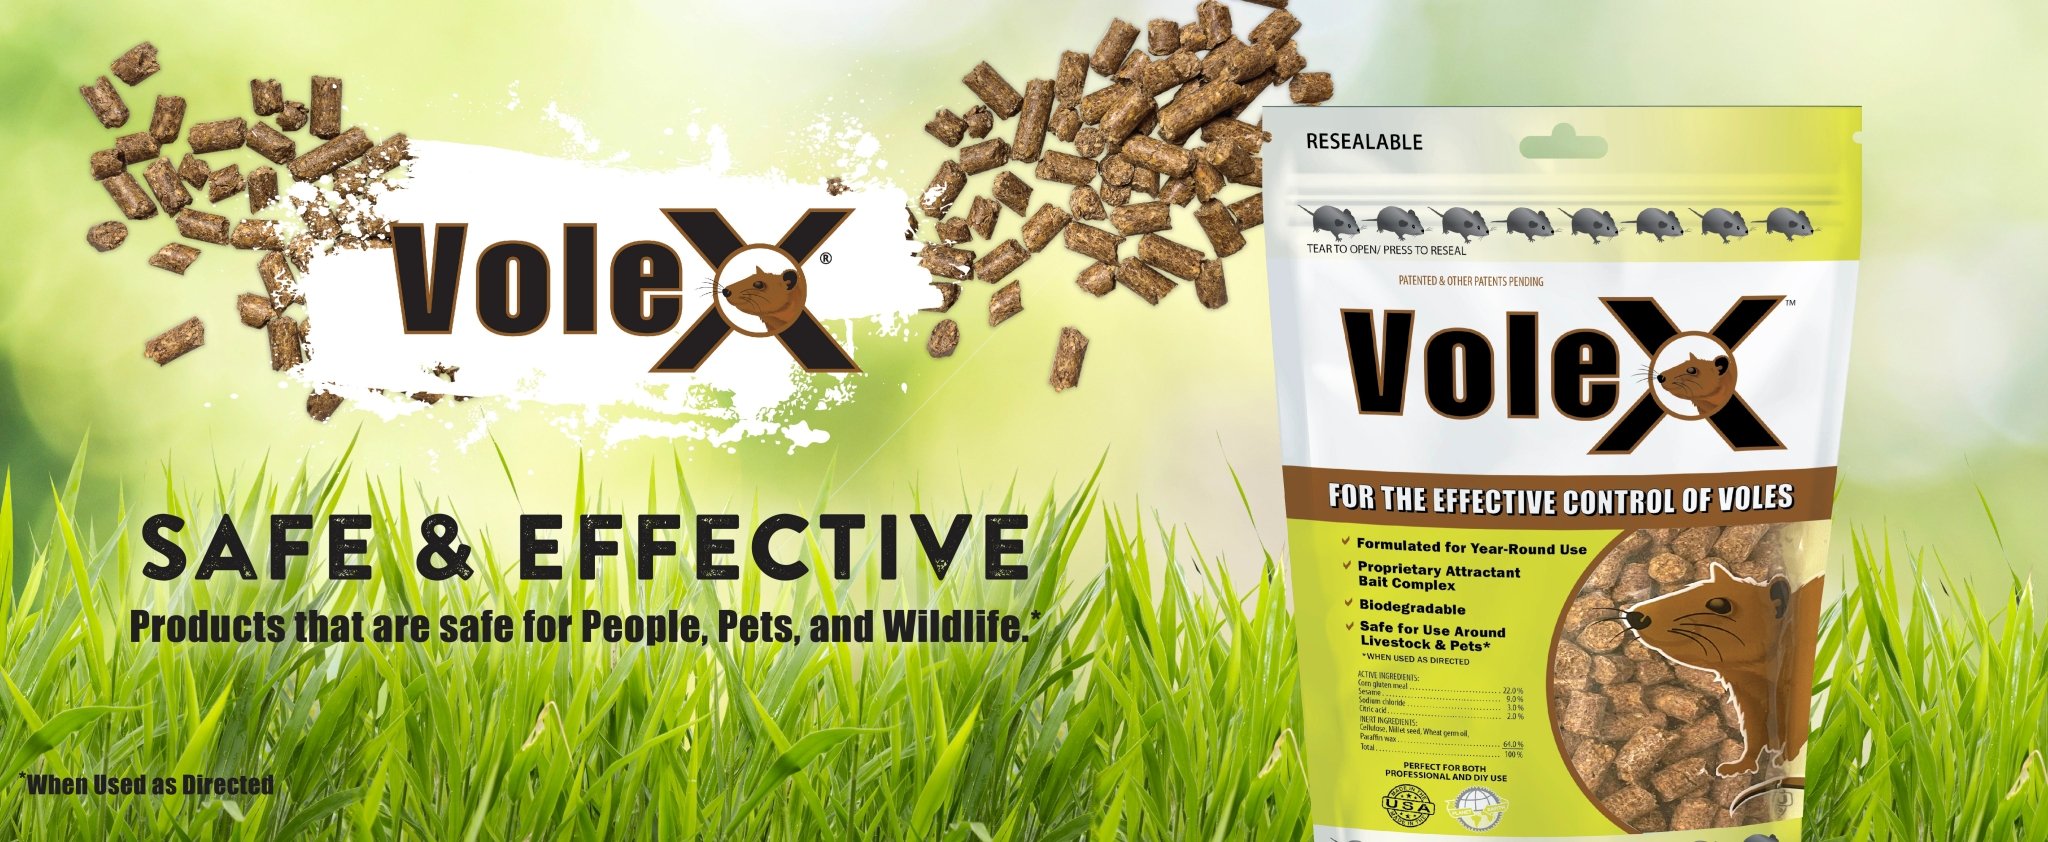 http://ecoclearproducts.com/cdn/shop/articles/how-to-guide-voles-708440.jpg?v=1692821893